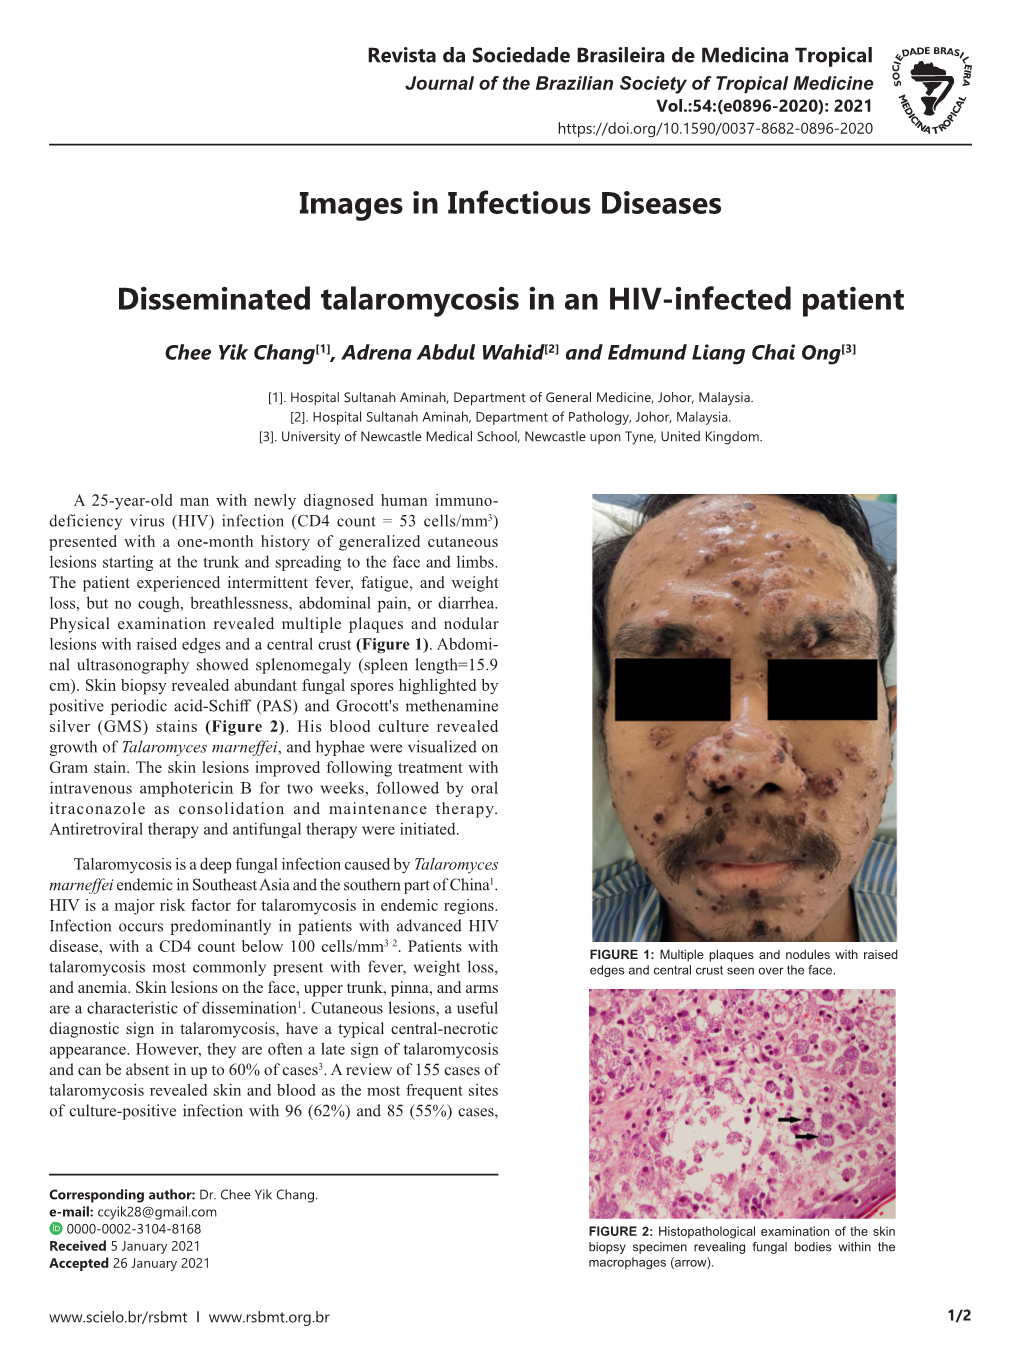 Images in Infectious Diseases Disseminated Talaromycosis in An